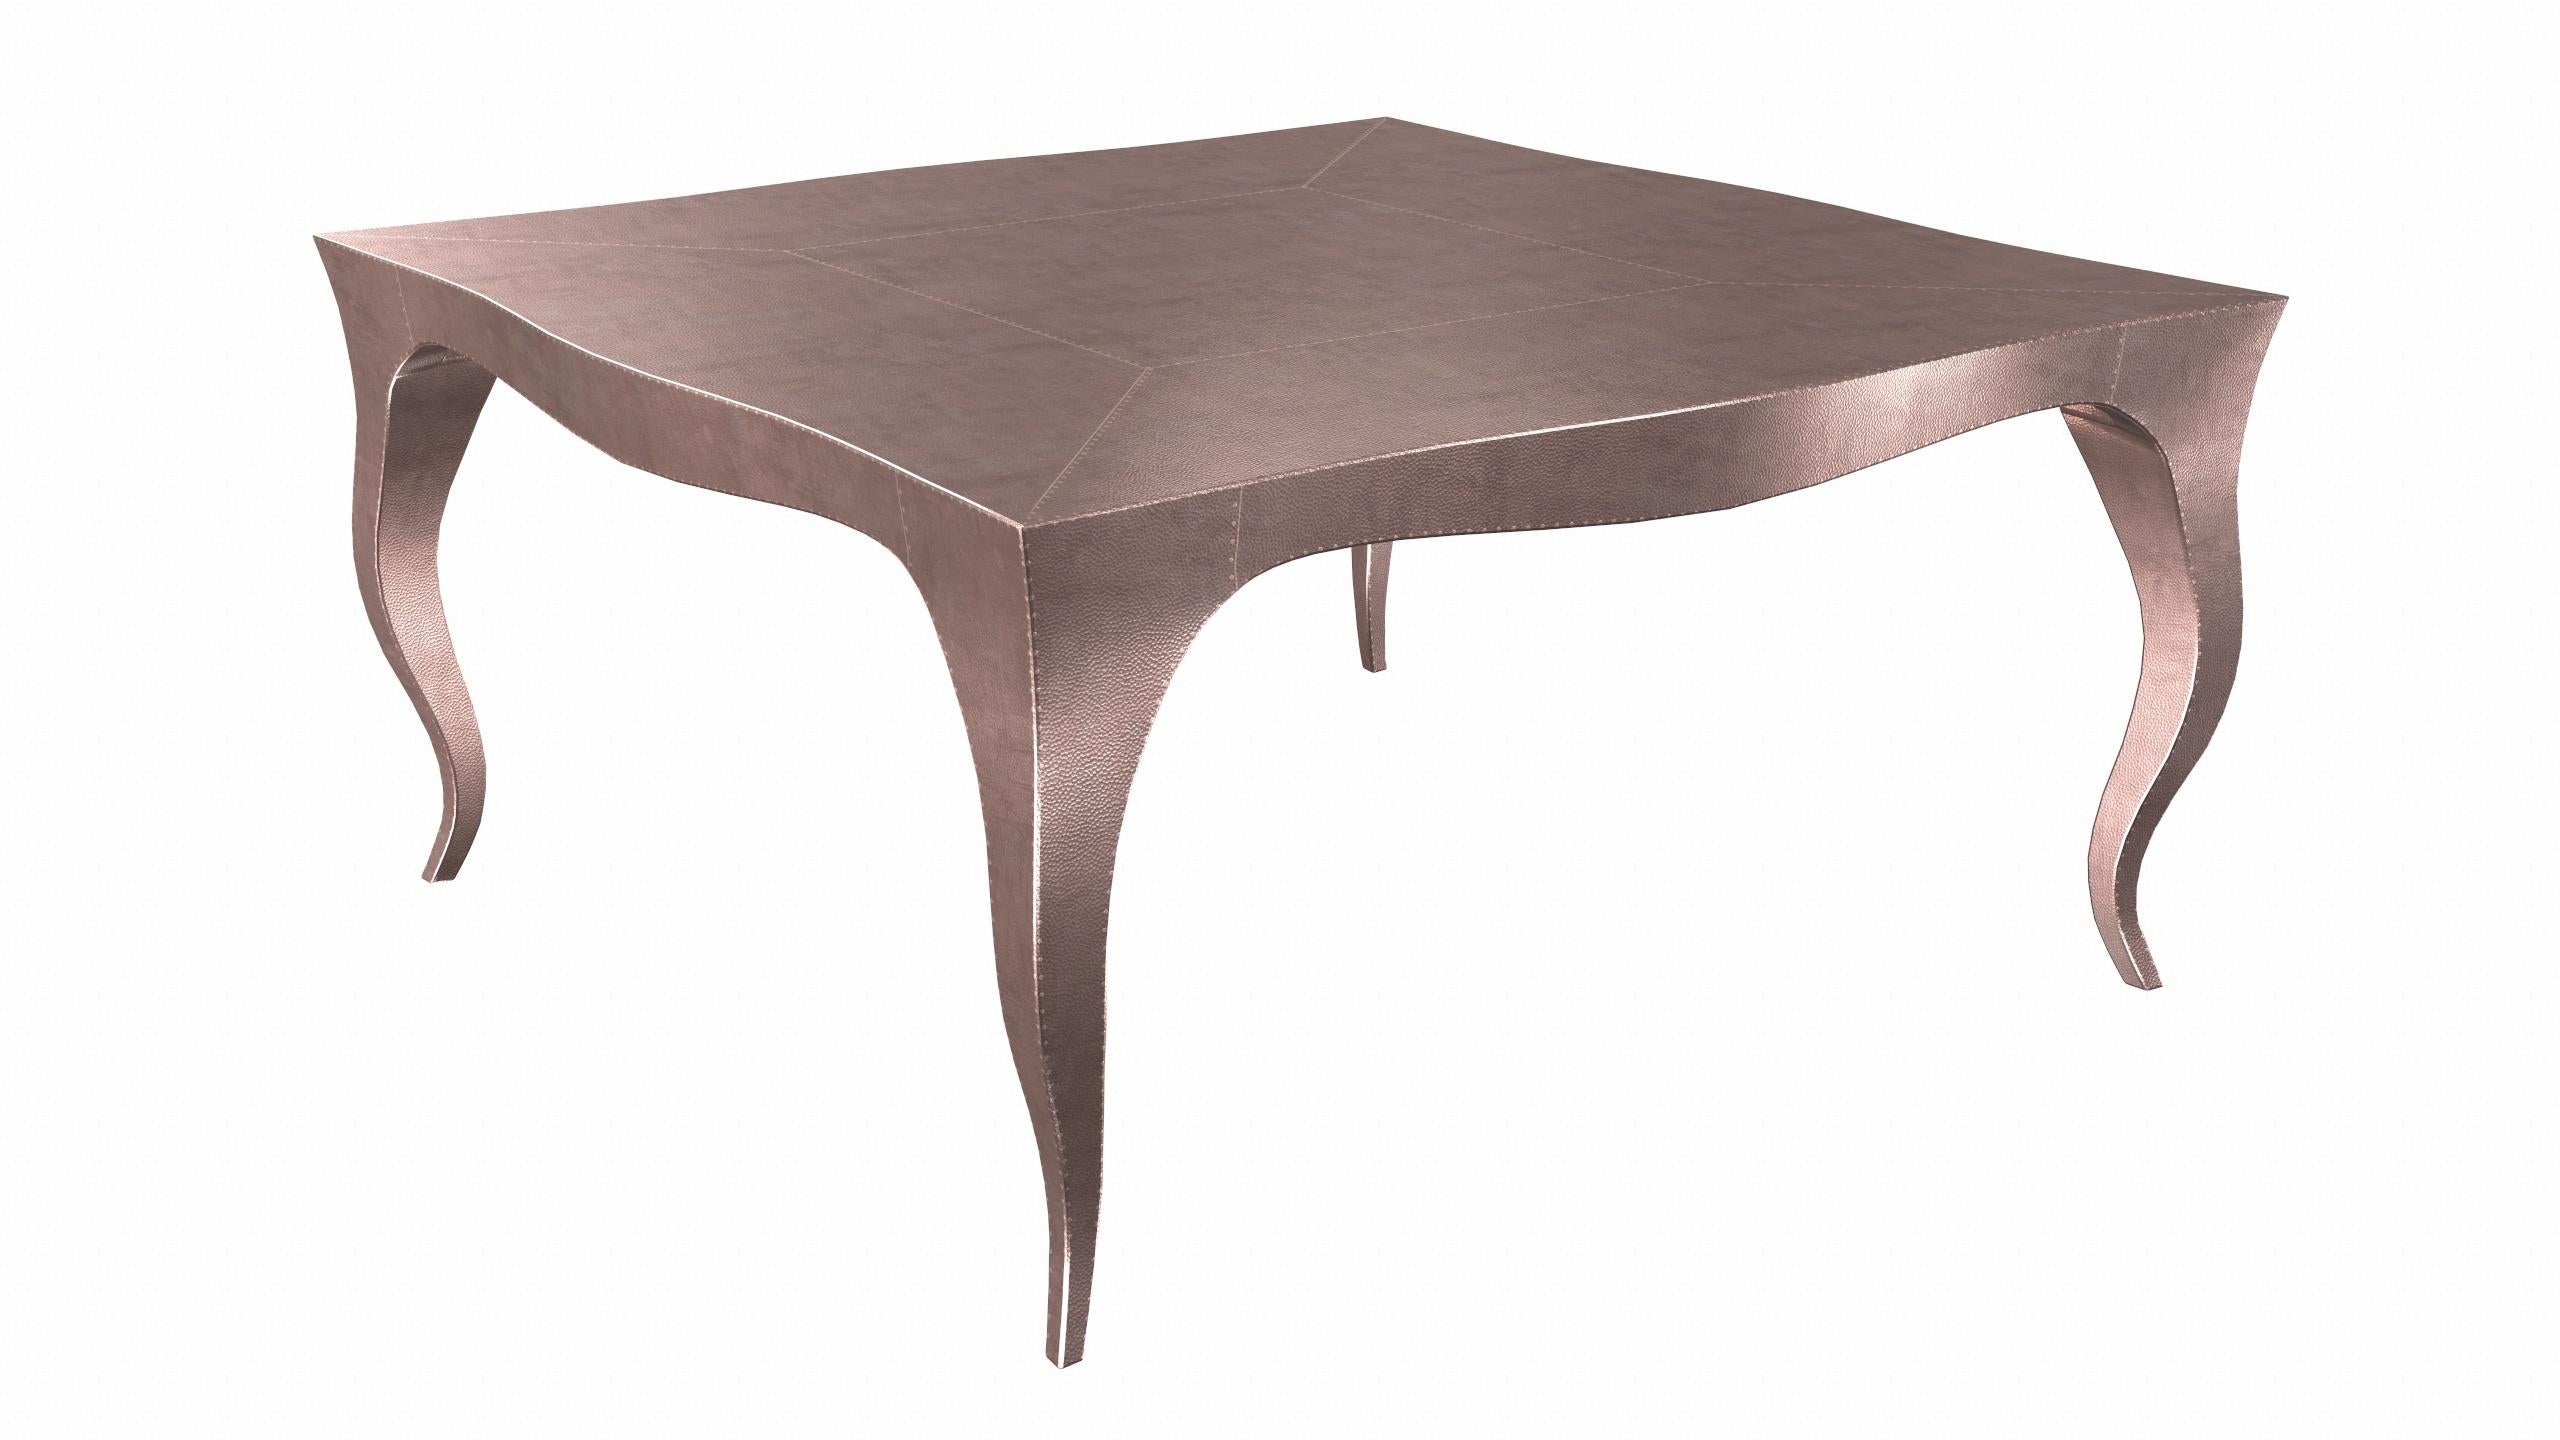 Hand-Carved Louise Art Deco Card Tables and Tea Tables Mid. Hammered Copper by Paul Mathieu For Sale